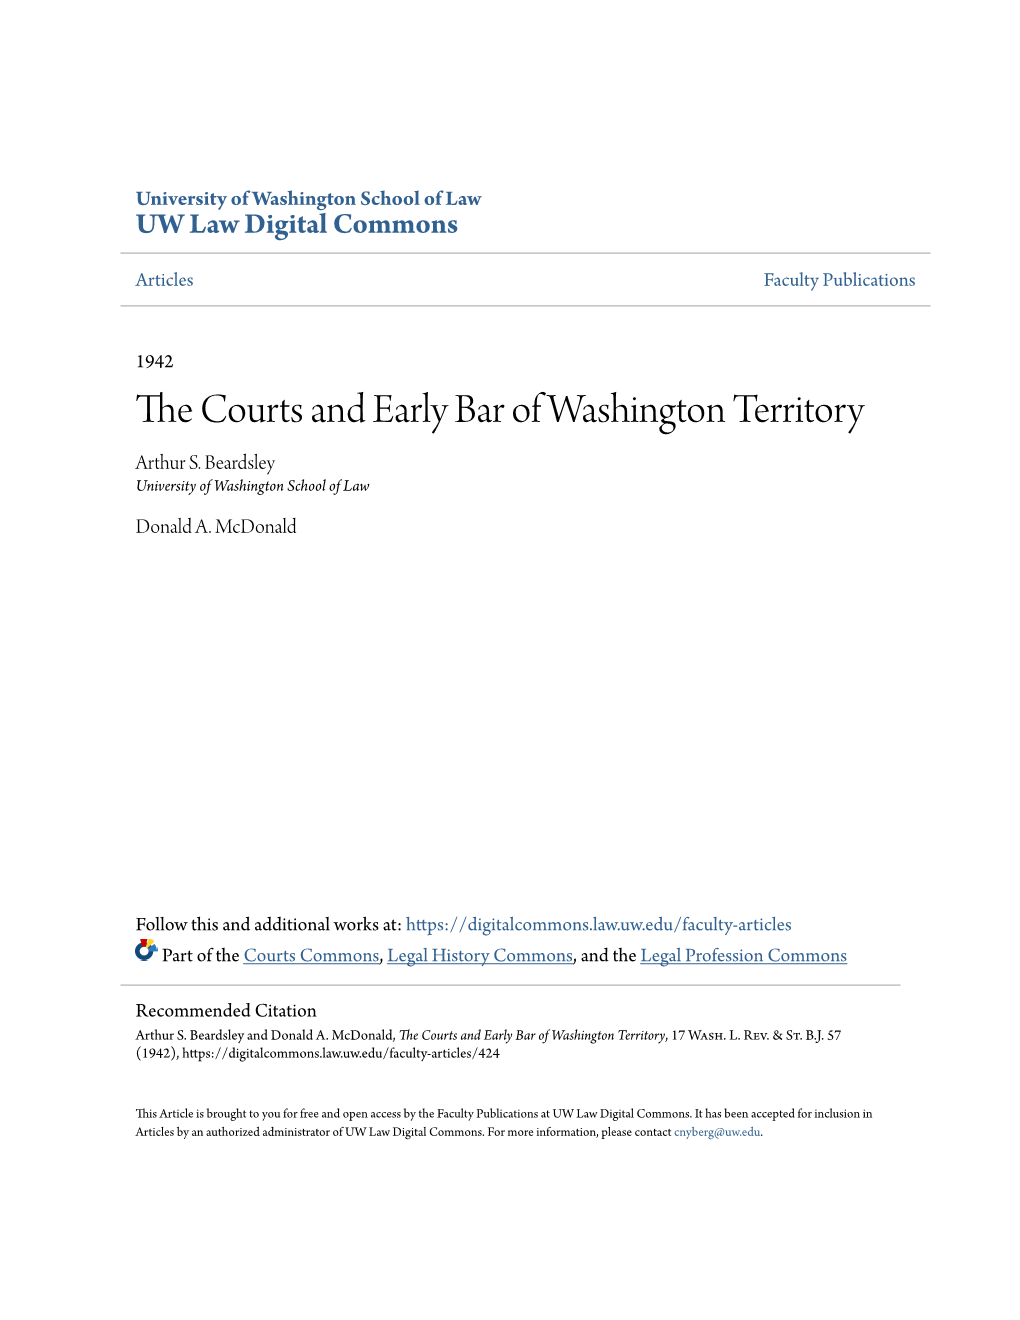 The Courts and Early Bar of Washington Territory, 17 Wash